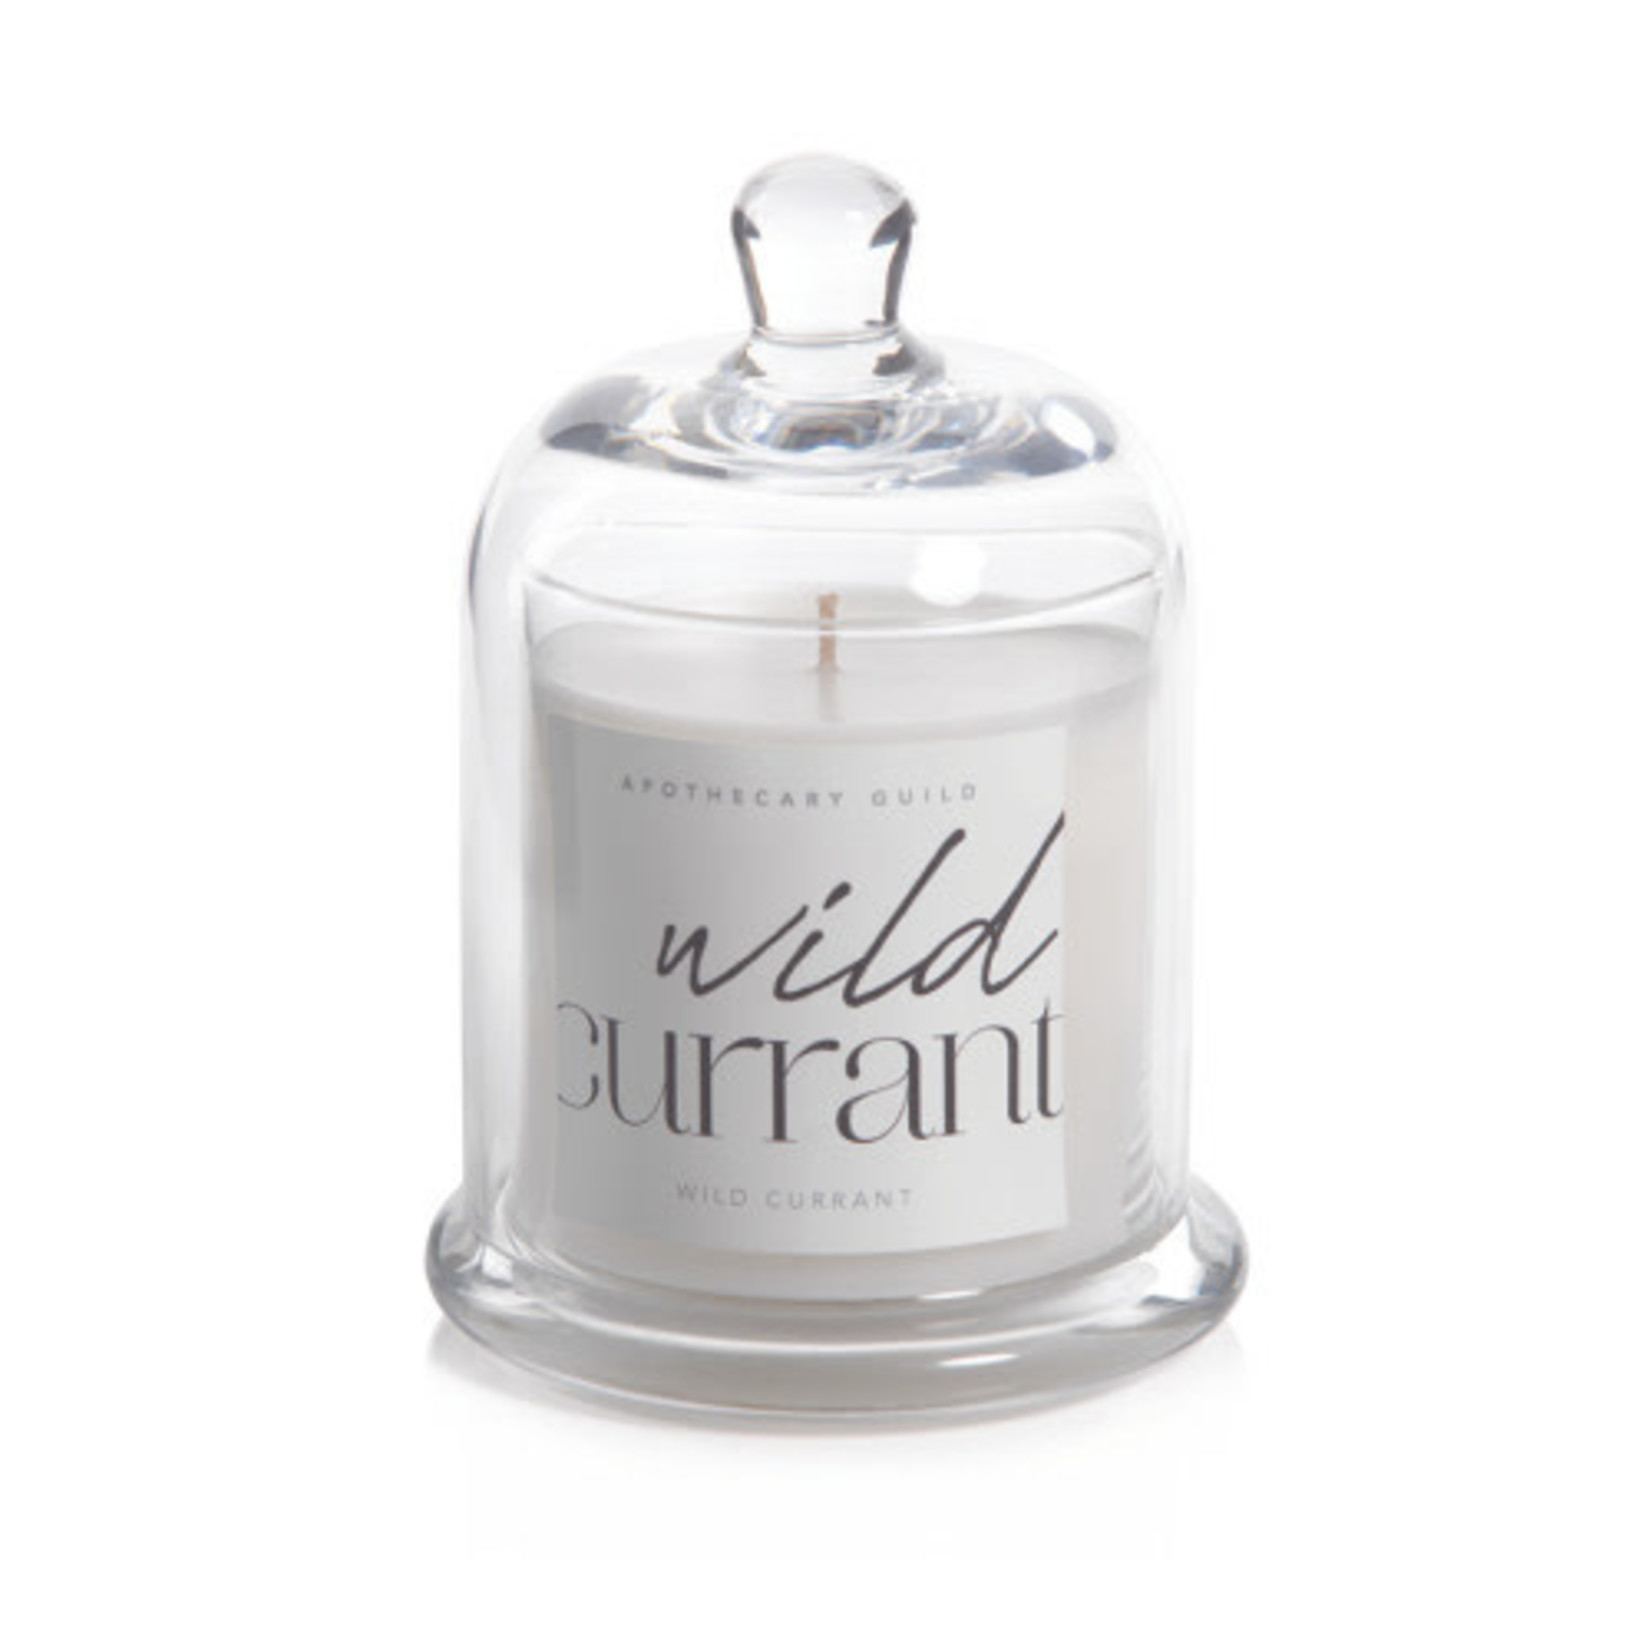 Scented Candle Dome Jar - Wild Current